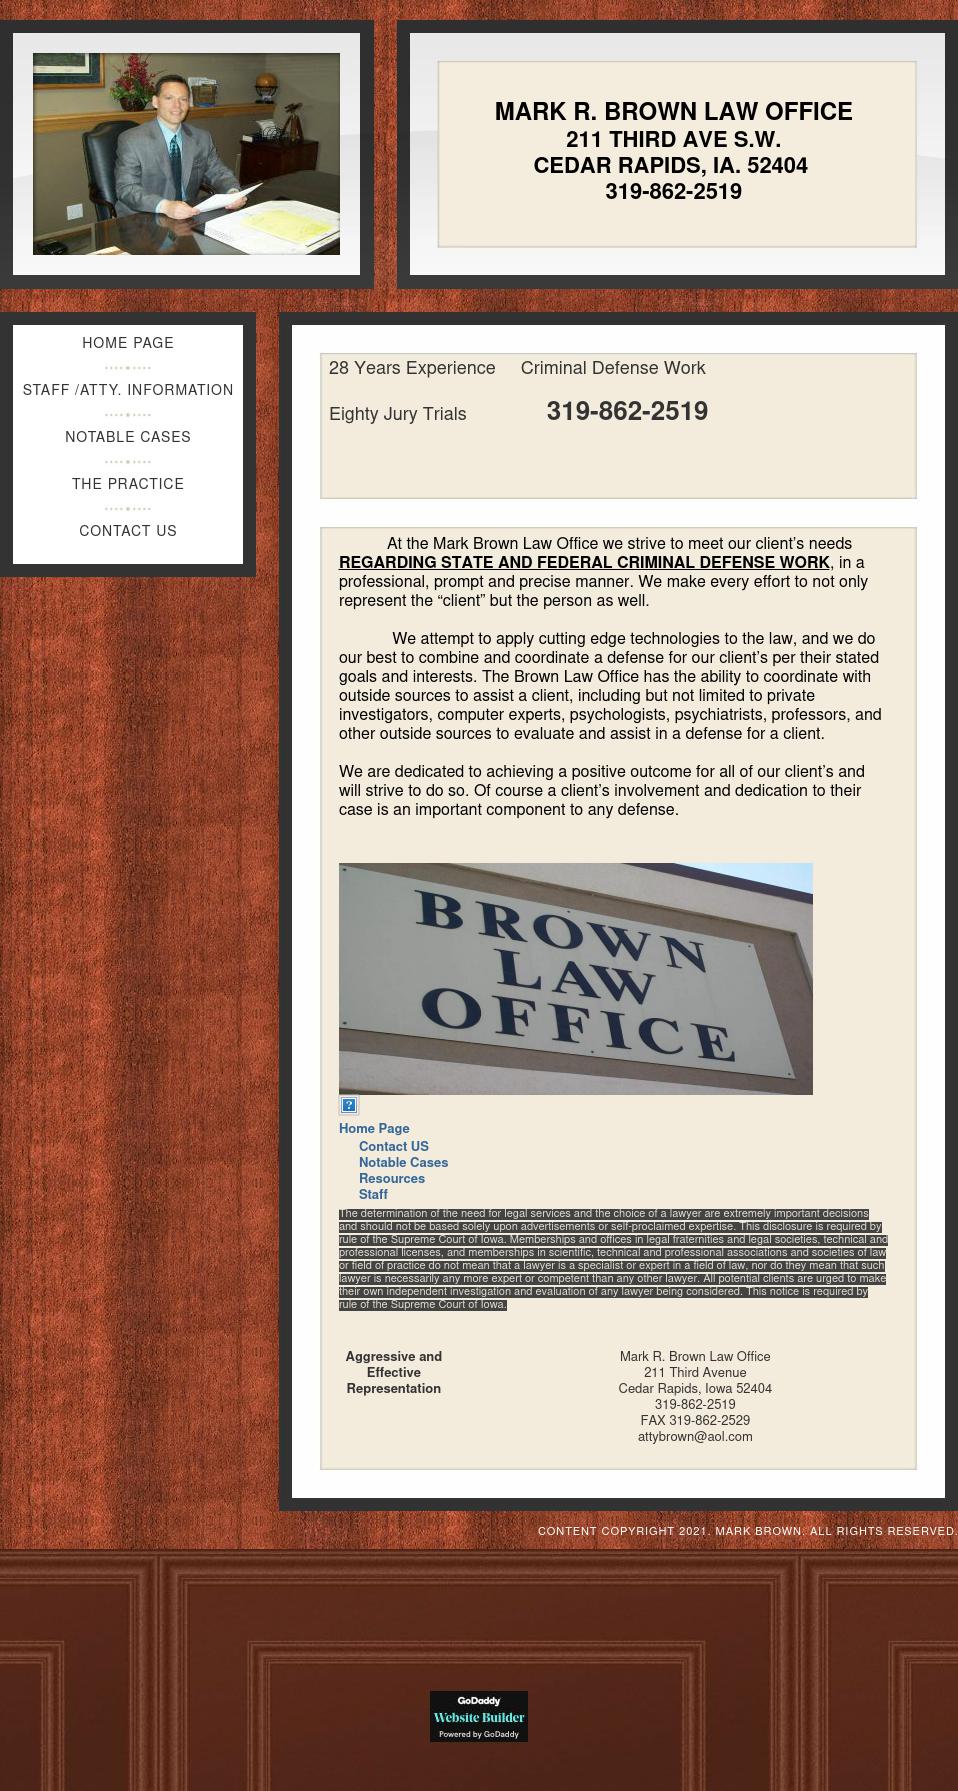 Brown Law Office-State and Federal Criminal Law Only. - Cedar Rapids IA Lawyers